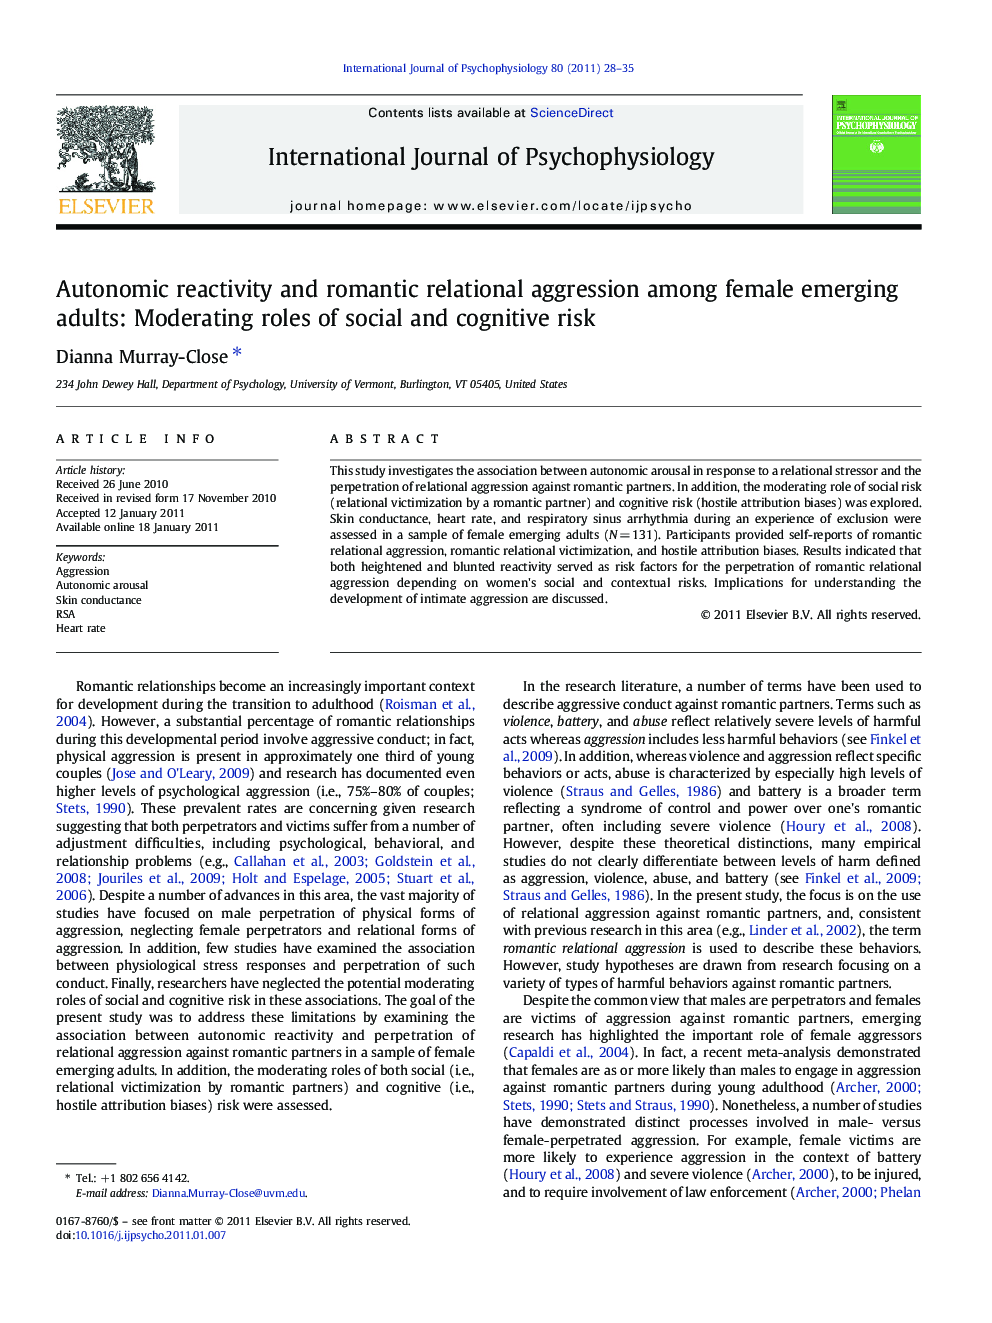 Autonomic reactivity and romantic relational aggression among female emerging adults: Moderating roles of social and cognitive risk